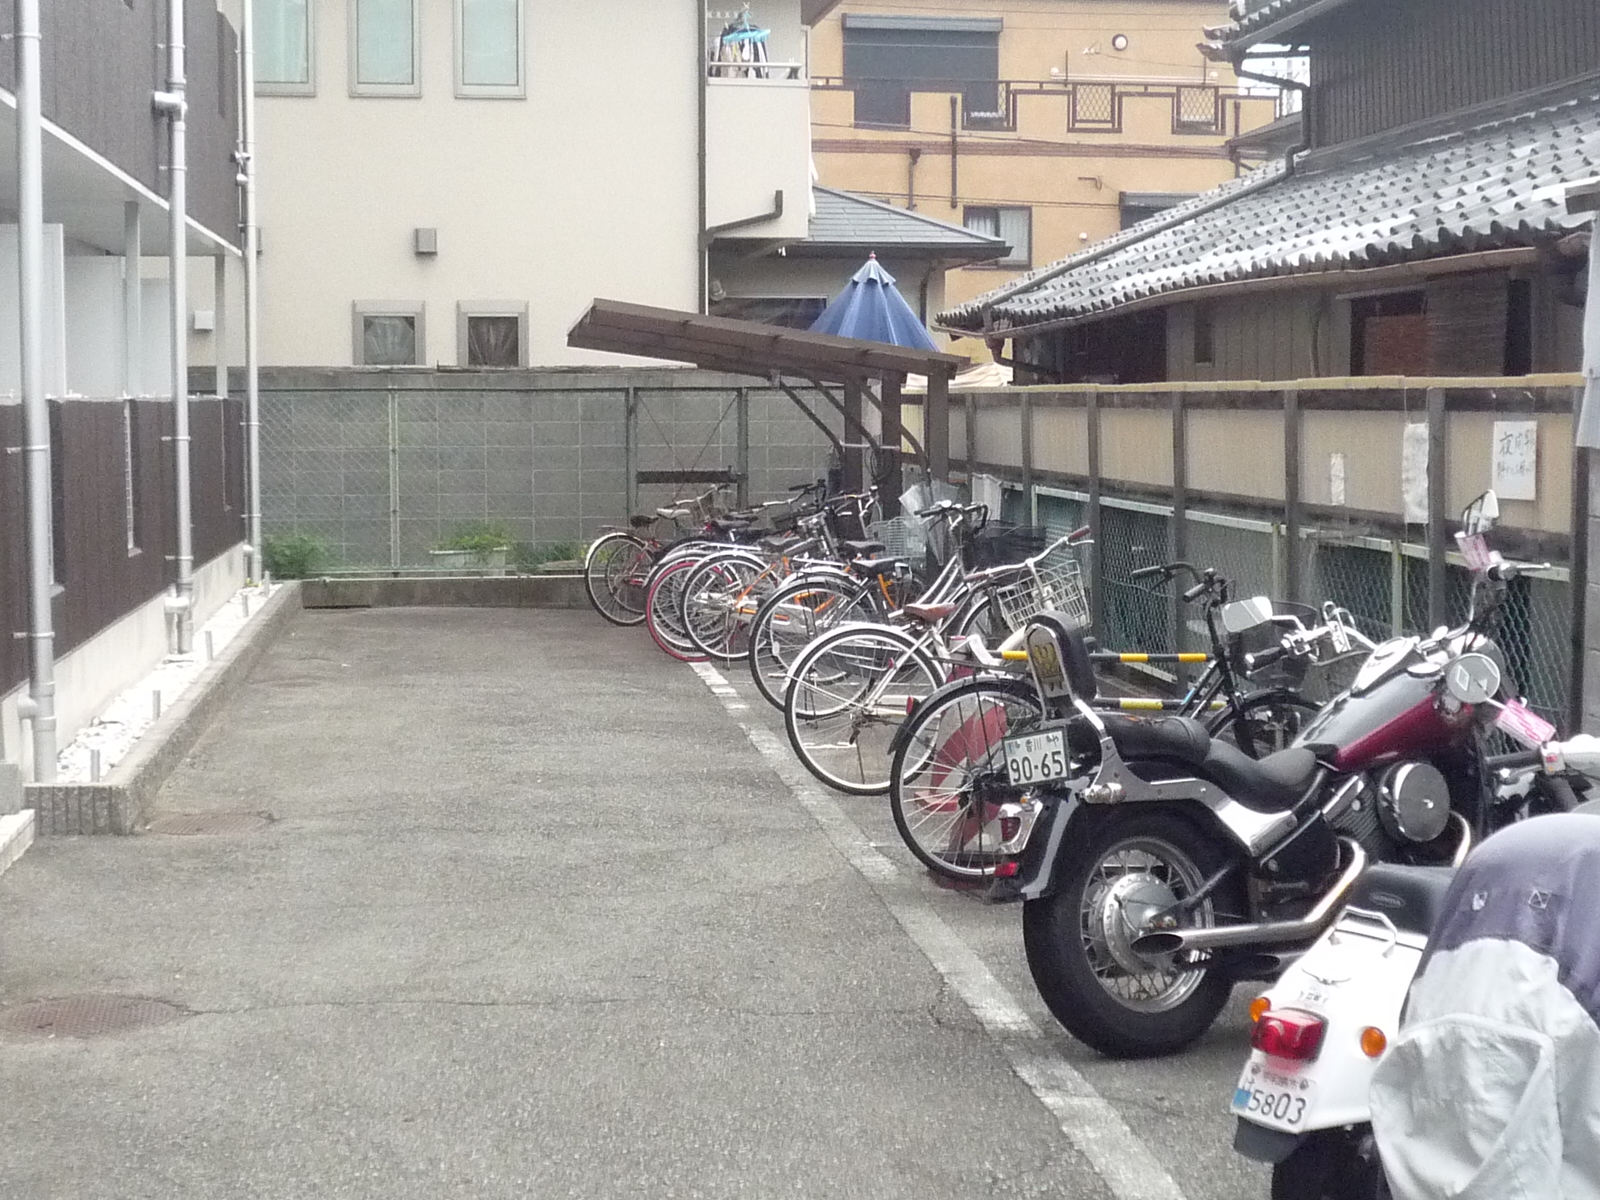 Parking lot. Bicycle parking space, Firmly Spacious. Large-sized bike okay!